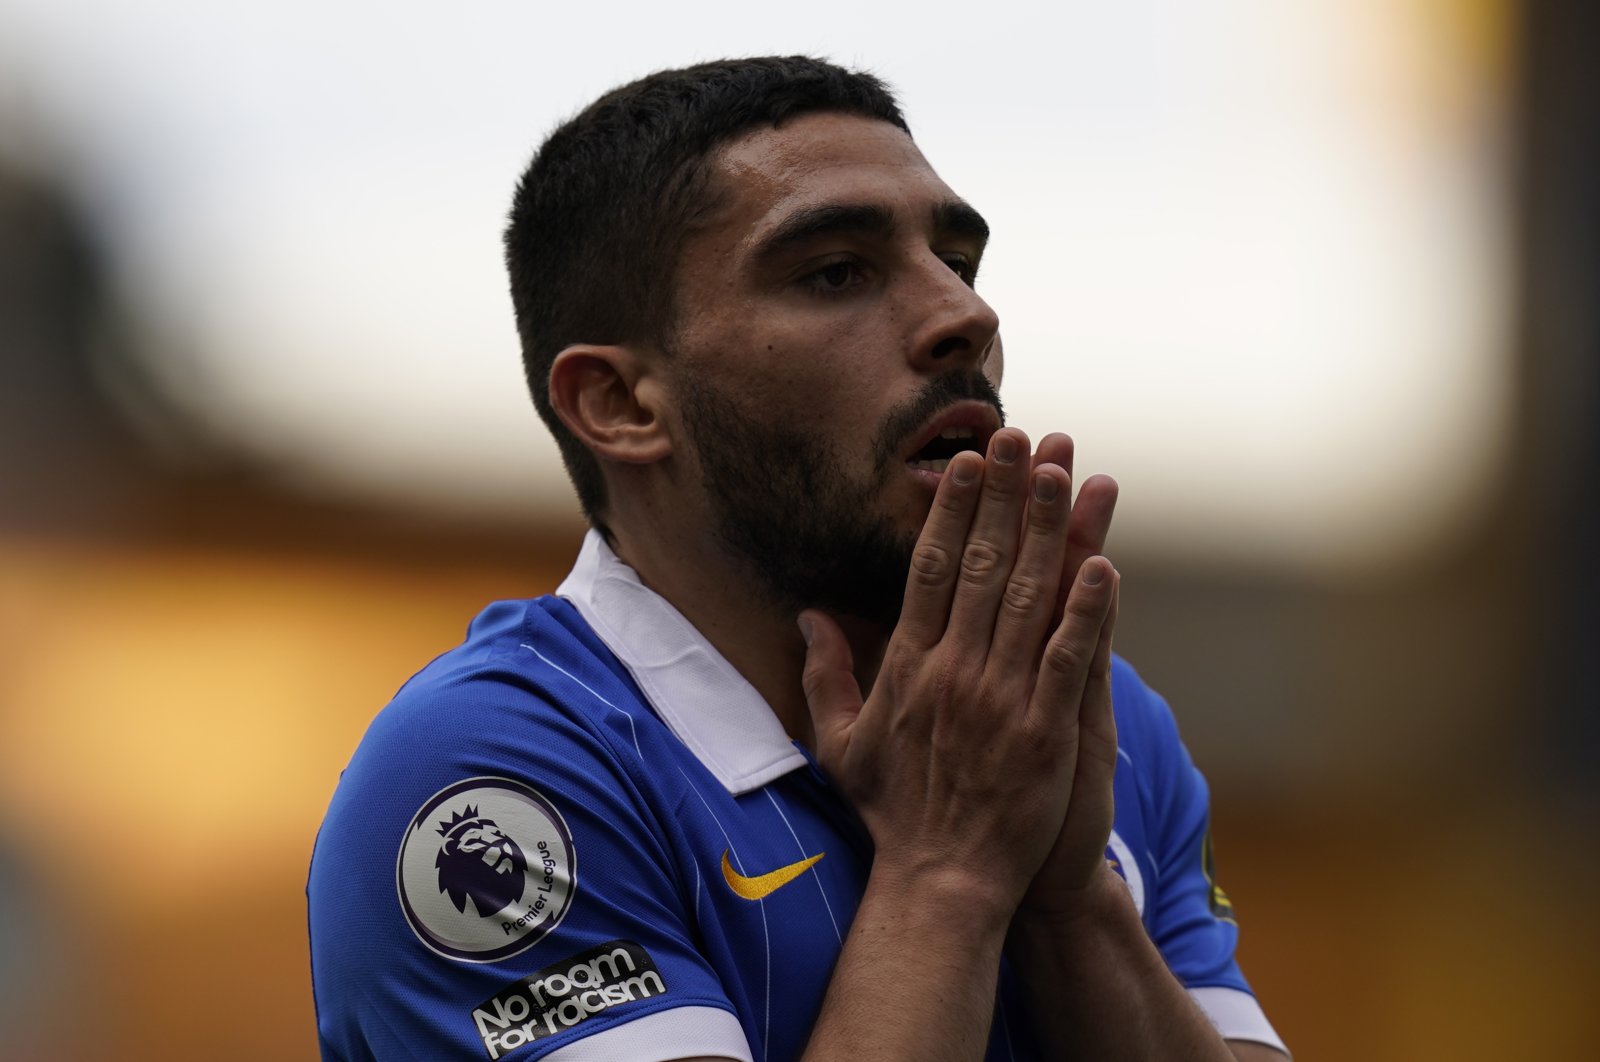 Brighton & Hove Albion's Neal Maupay reacts during a match against Wolverhampton Wanderers, Wolverhampton, England, May 9, 2021. (Reuters Photo)